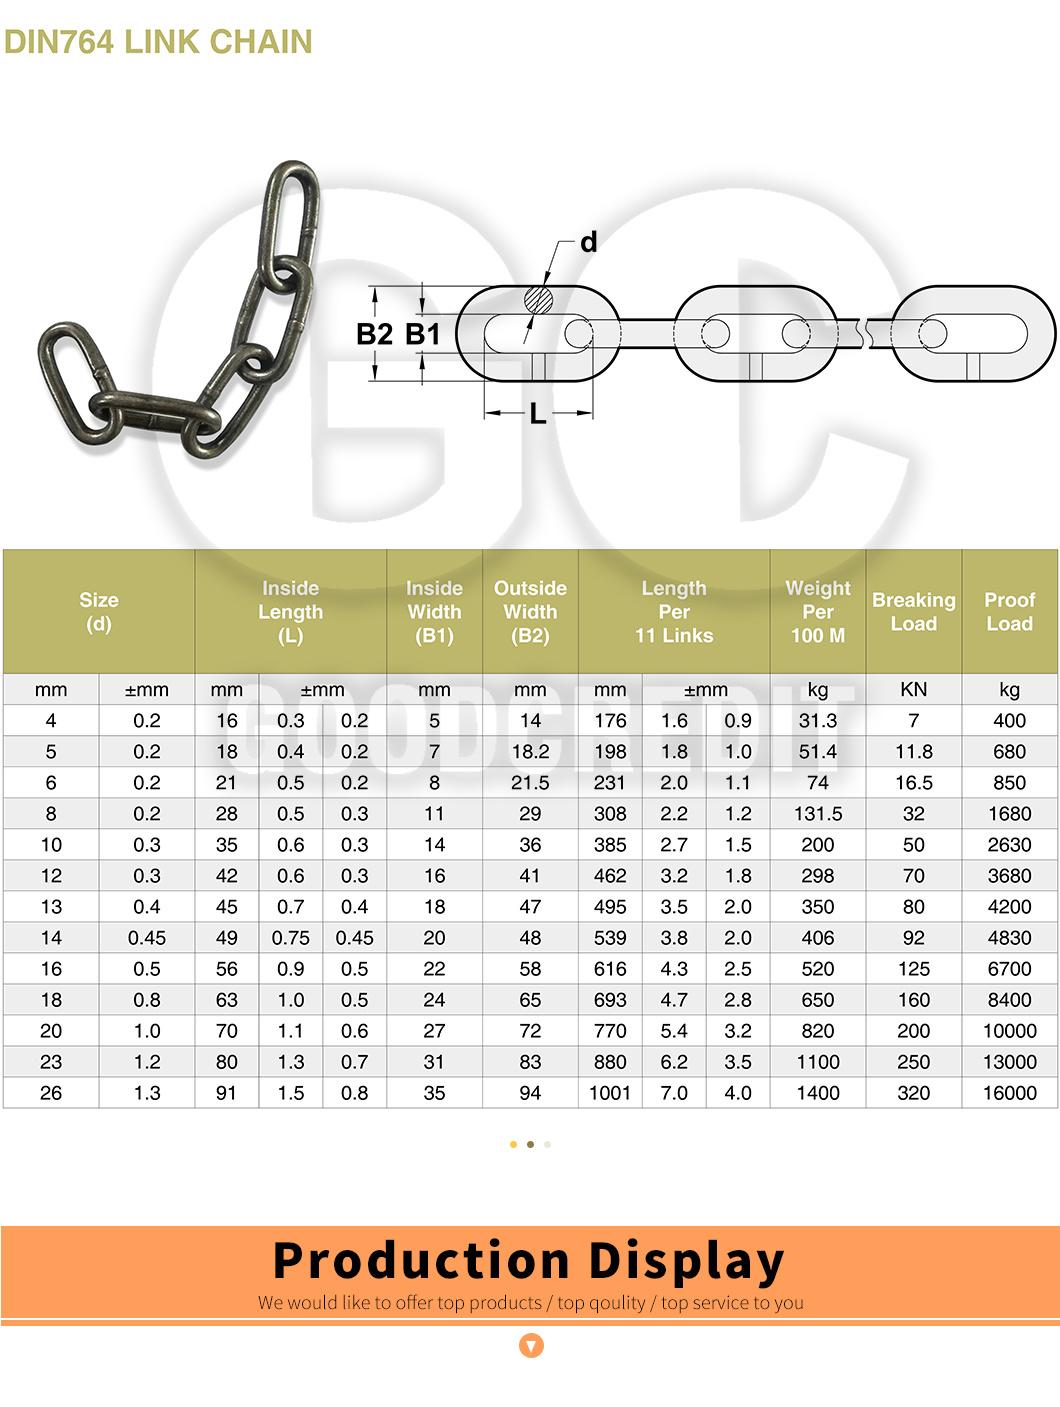 Factory Steel or Stainless Steel DIN 766 763 Single Anchor Boat Chain